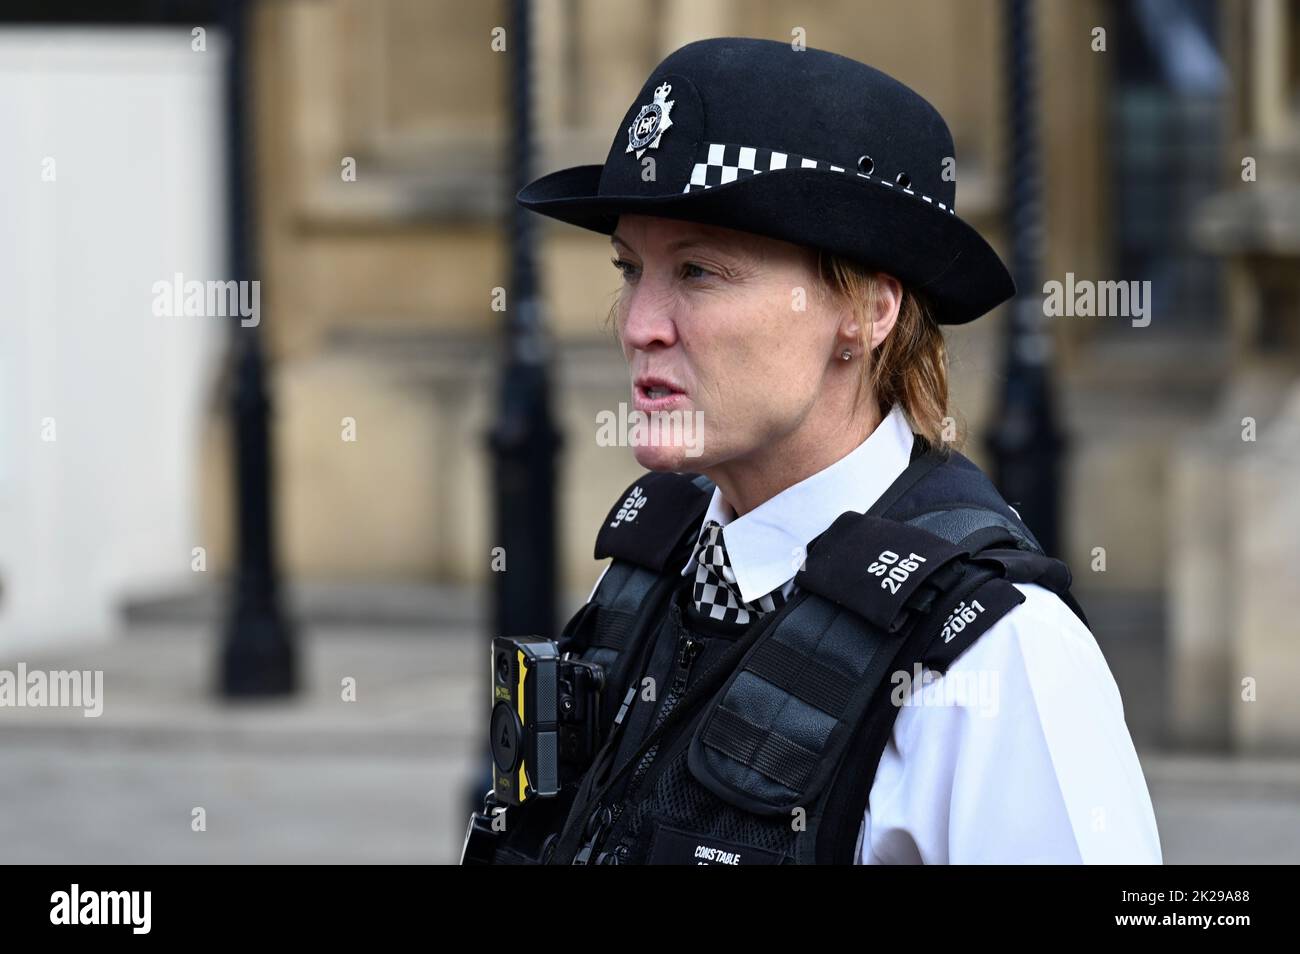 Policewoman, Houses of Parliament, Westminster, London. UK Stock Photo